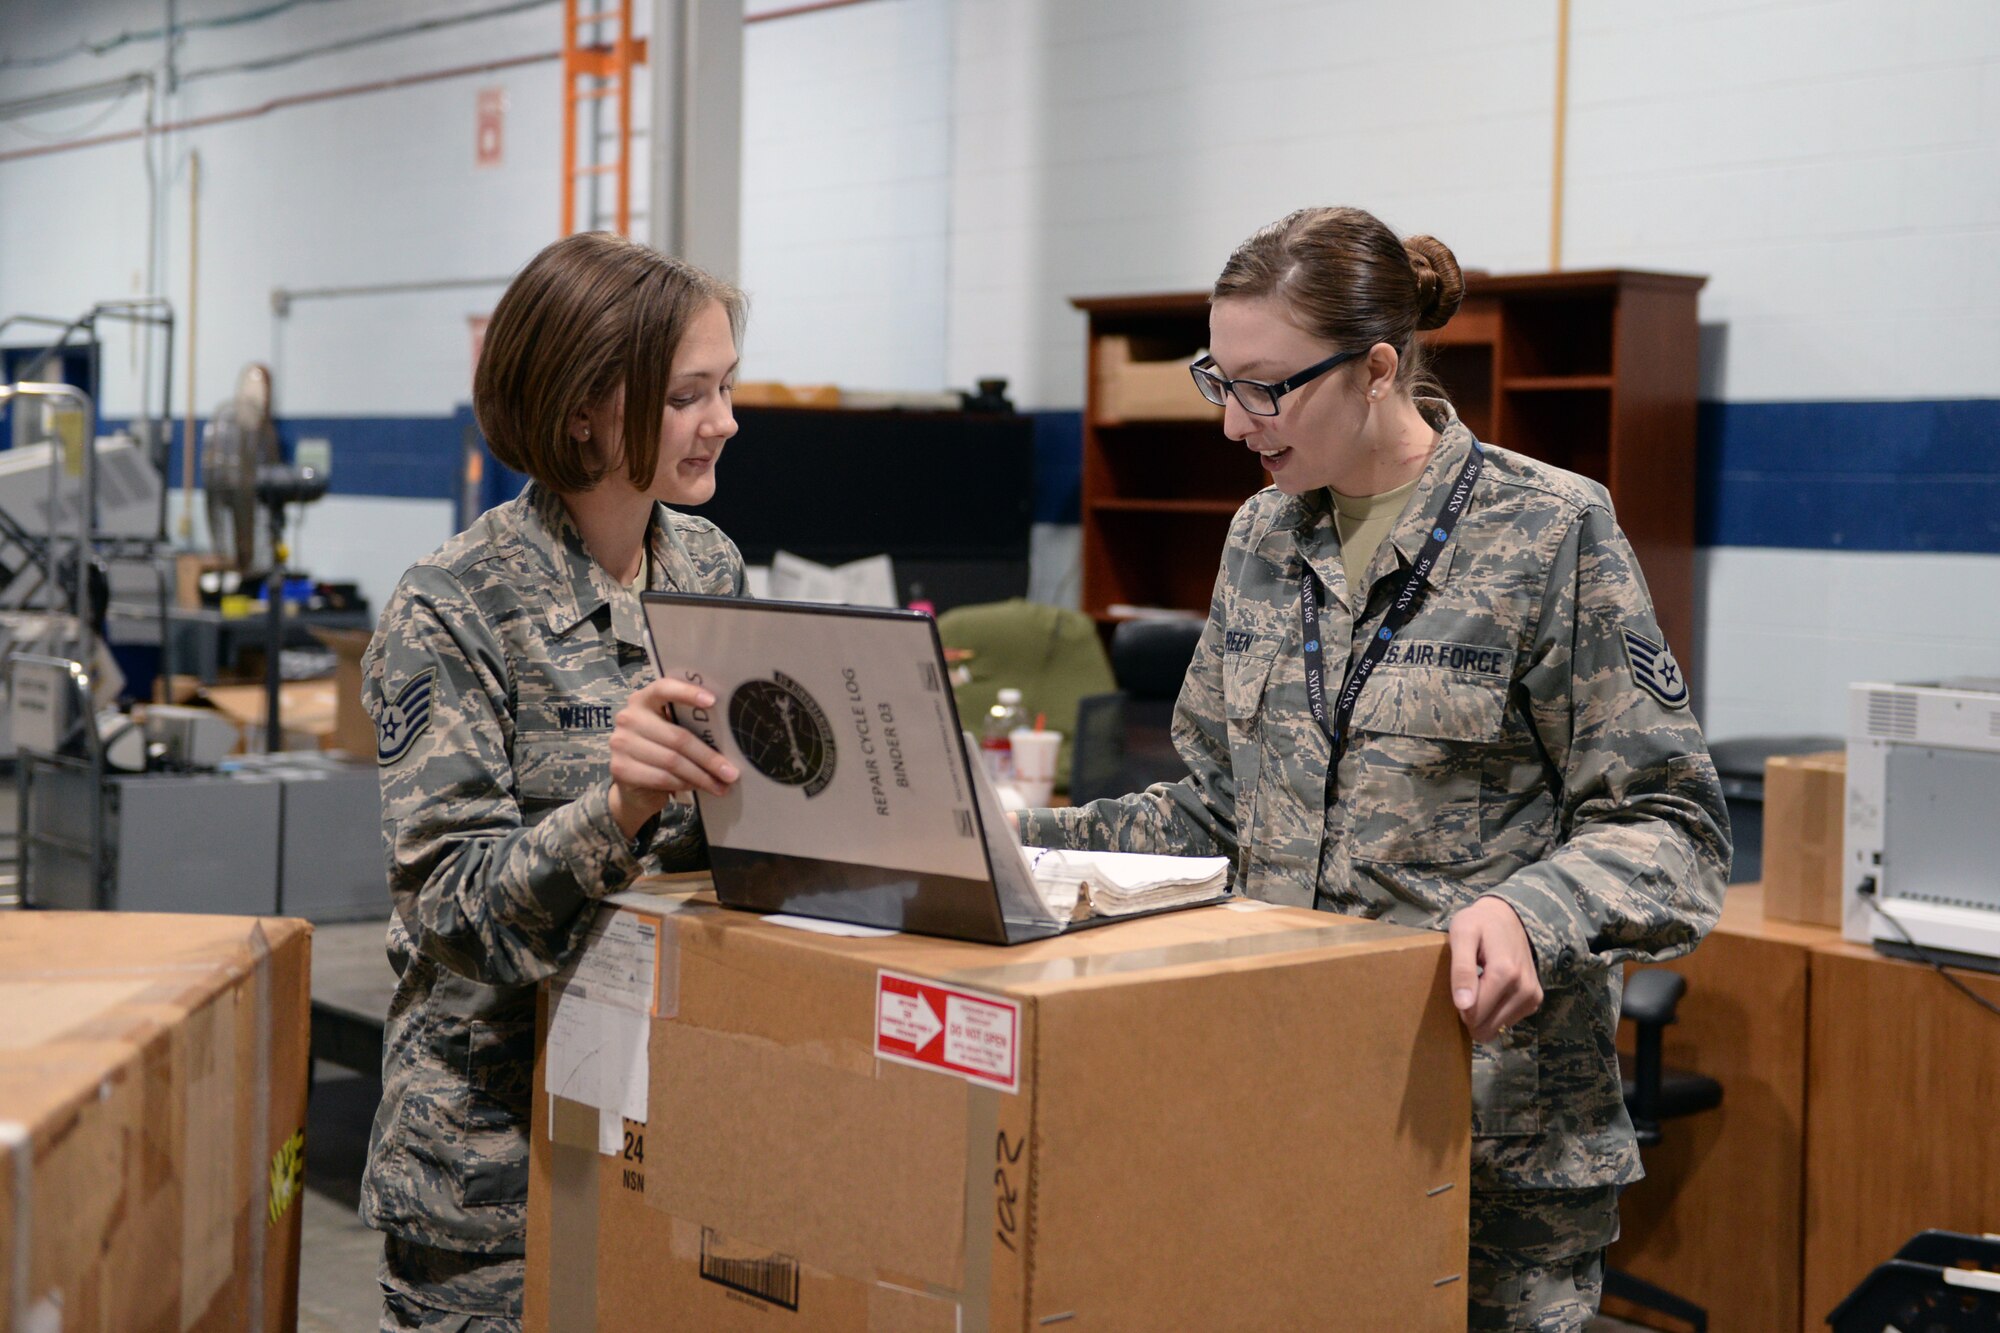 Staff Sgt. Destine White, 55th Logistics Readiness Squadron NCO in charge of equipment accounts, assists Staff Sgt. Falena Green, 595th Aircraft Maintenance Squadron, with returning an aircraft part in the Bennie L. Davis Maintenance Facility Warehouse Monday, Oct. 16, 2017, on Offutt Air Force Base, Nebraska. Green is a regular customer of the warehouse bringing aircraft parts for repair and picking up new parts to take back to her unit. (U.S. Air Force photo by Tech. Sgt. Rachelle Blake)